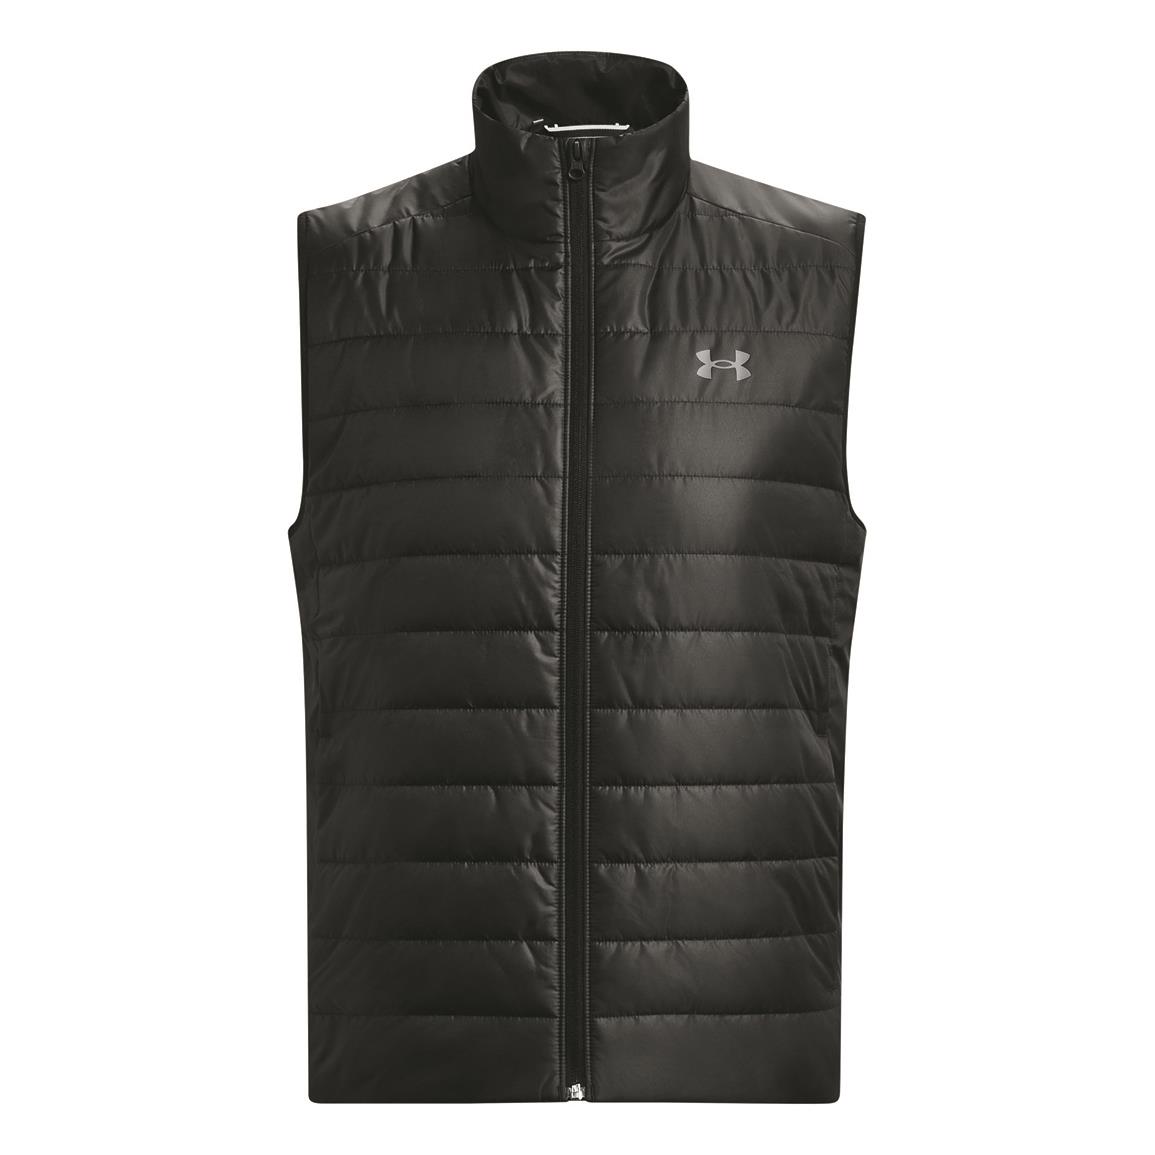 Under Armour Men's Storm Insulated Vest, Black/pitch Gray